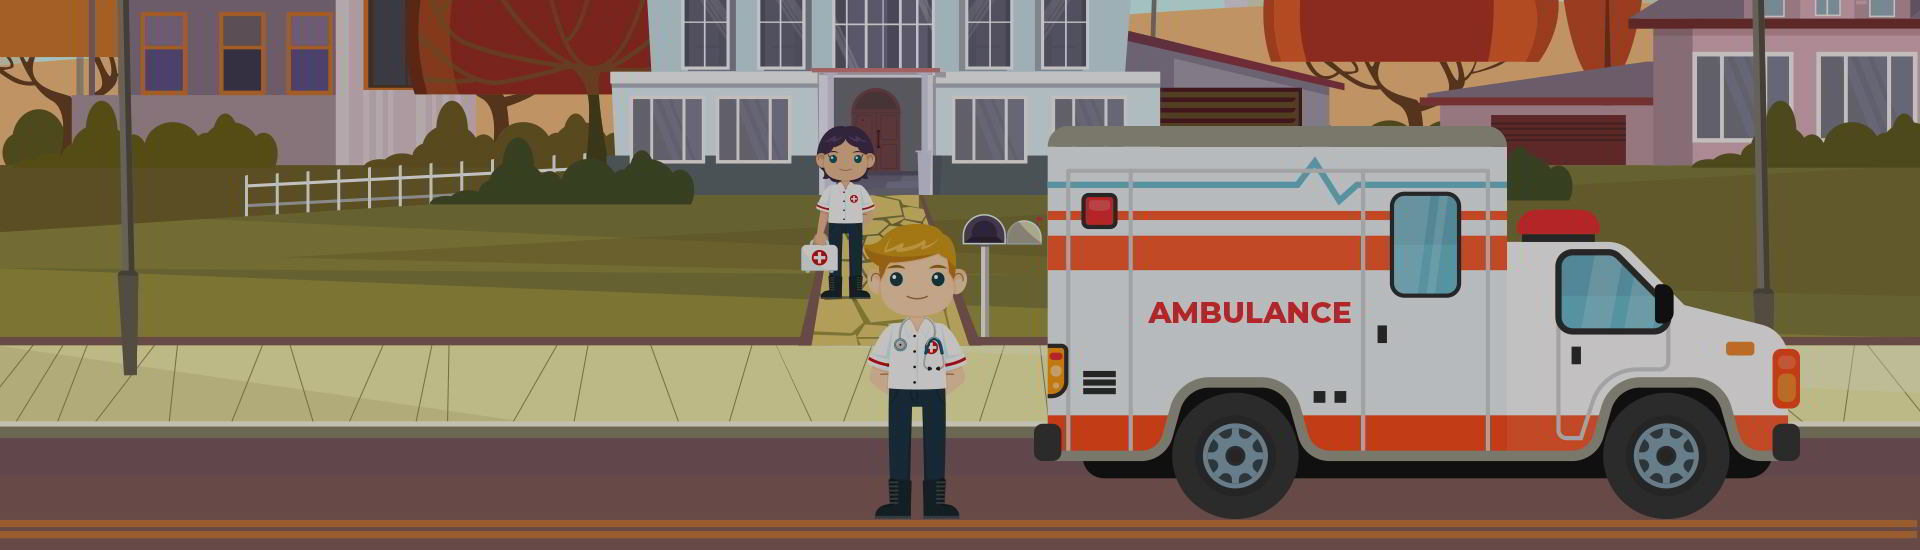 A doctor and nurse with an ambulance standing on the road